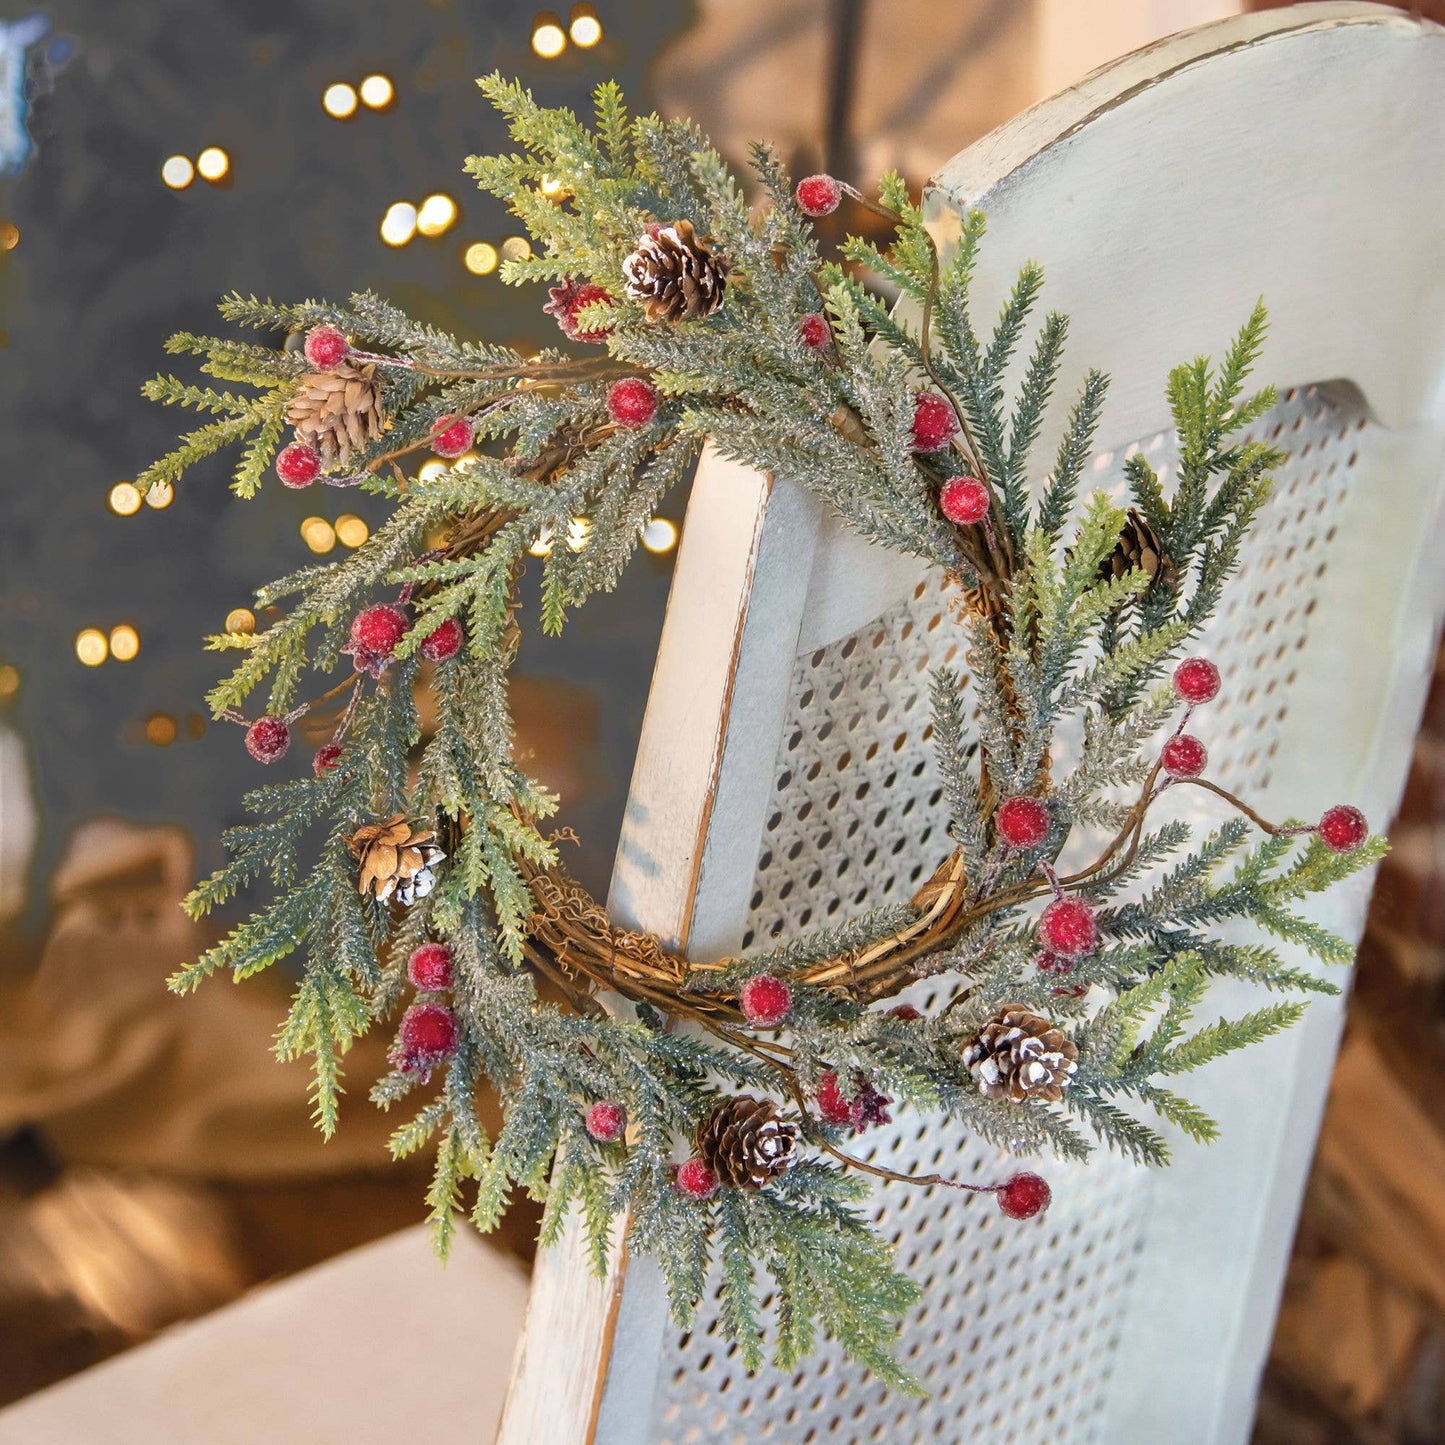 Mountain Pine with Berries Wreath